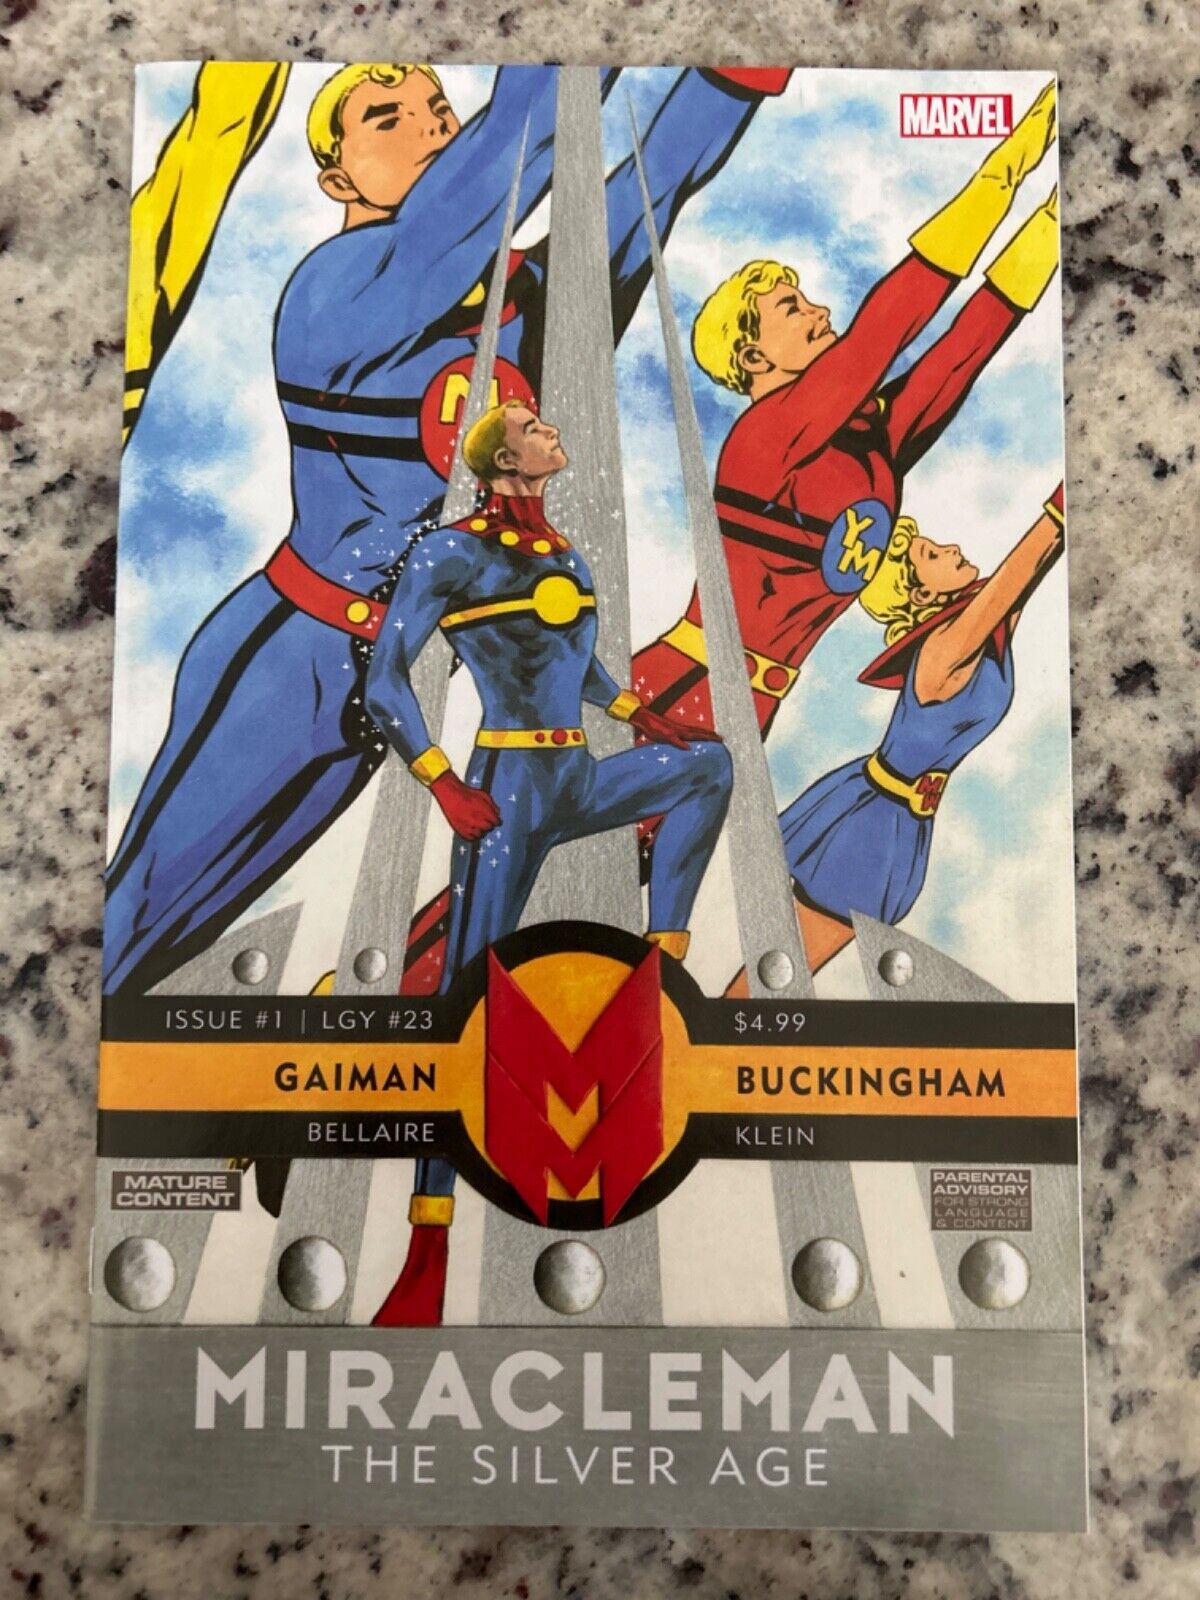 Miracleman By GaimanAnd Buckingham The Silver Age #1 (Marvel, 2022) VF+